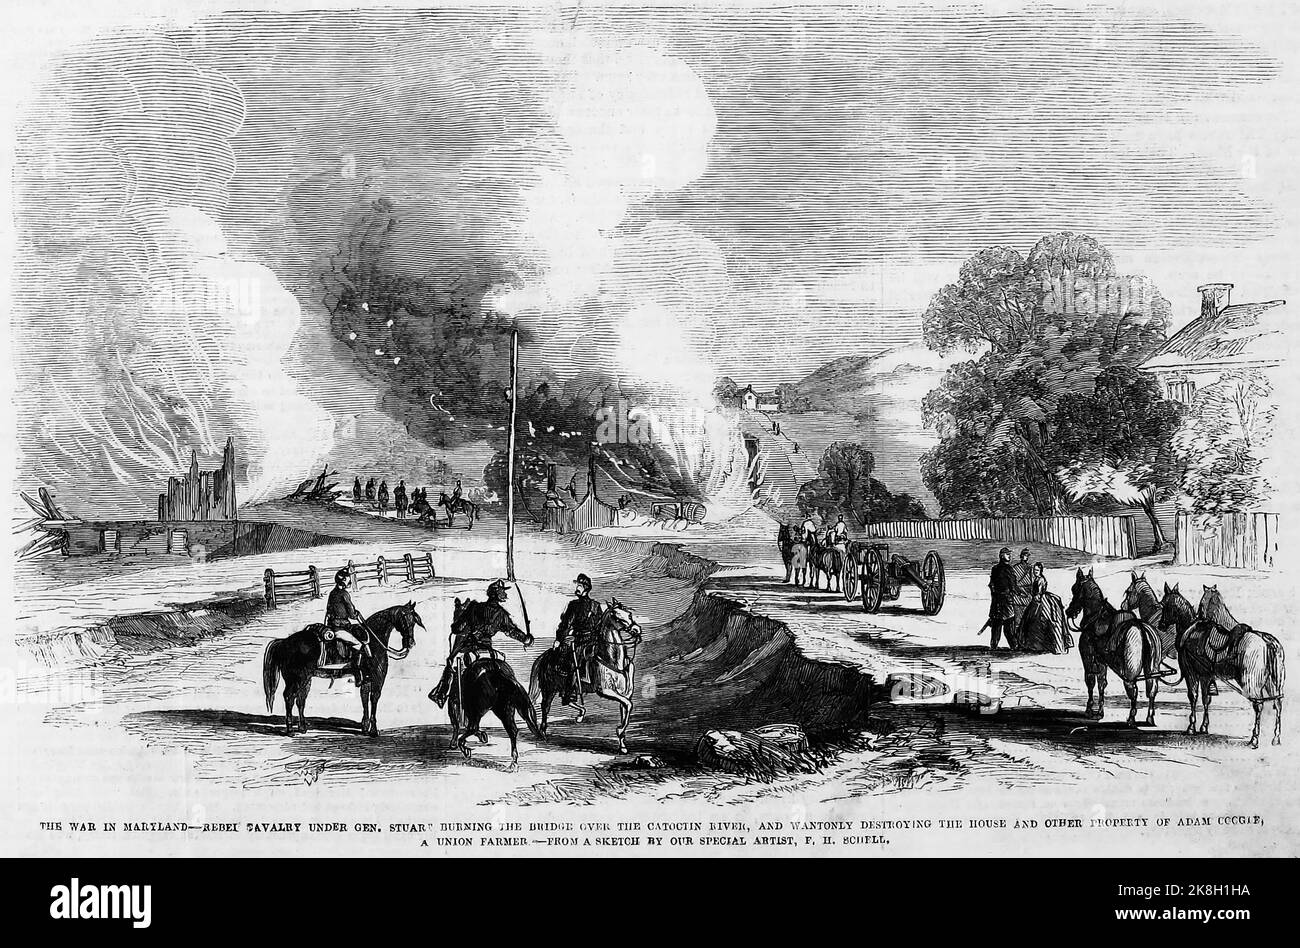 The War in Maryland - Rebel cavalry under General J. E. B. Stuart burning the bridge over the Catoctin River, and wantonly destroying the house and other property of Adam Coogle, a Union farmer. September 1862. 19th century American Civil War illustration from Frank Leslie's Illustrated Newspaper Stock Photo